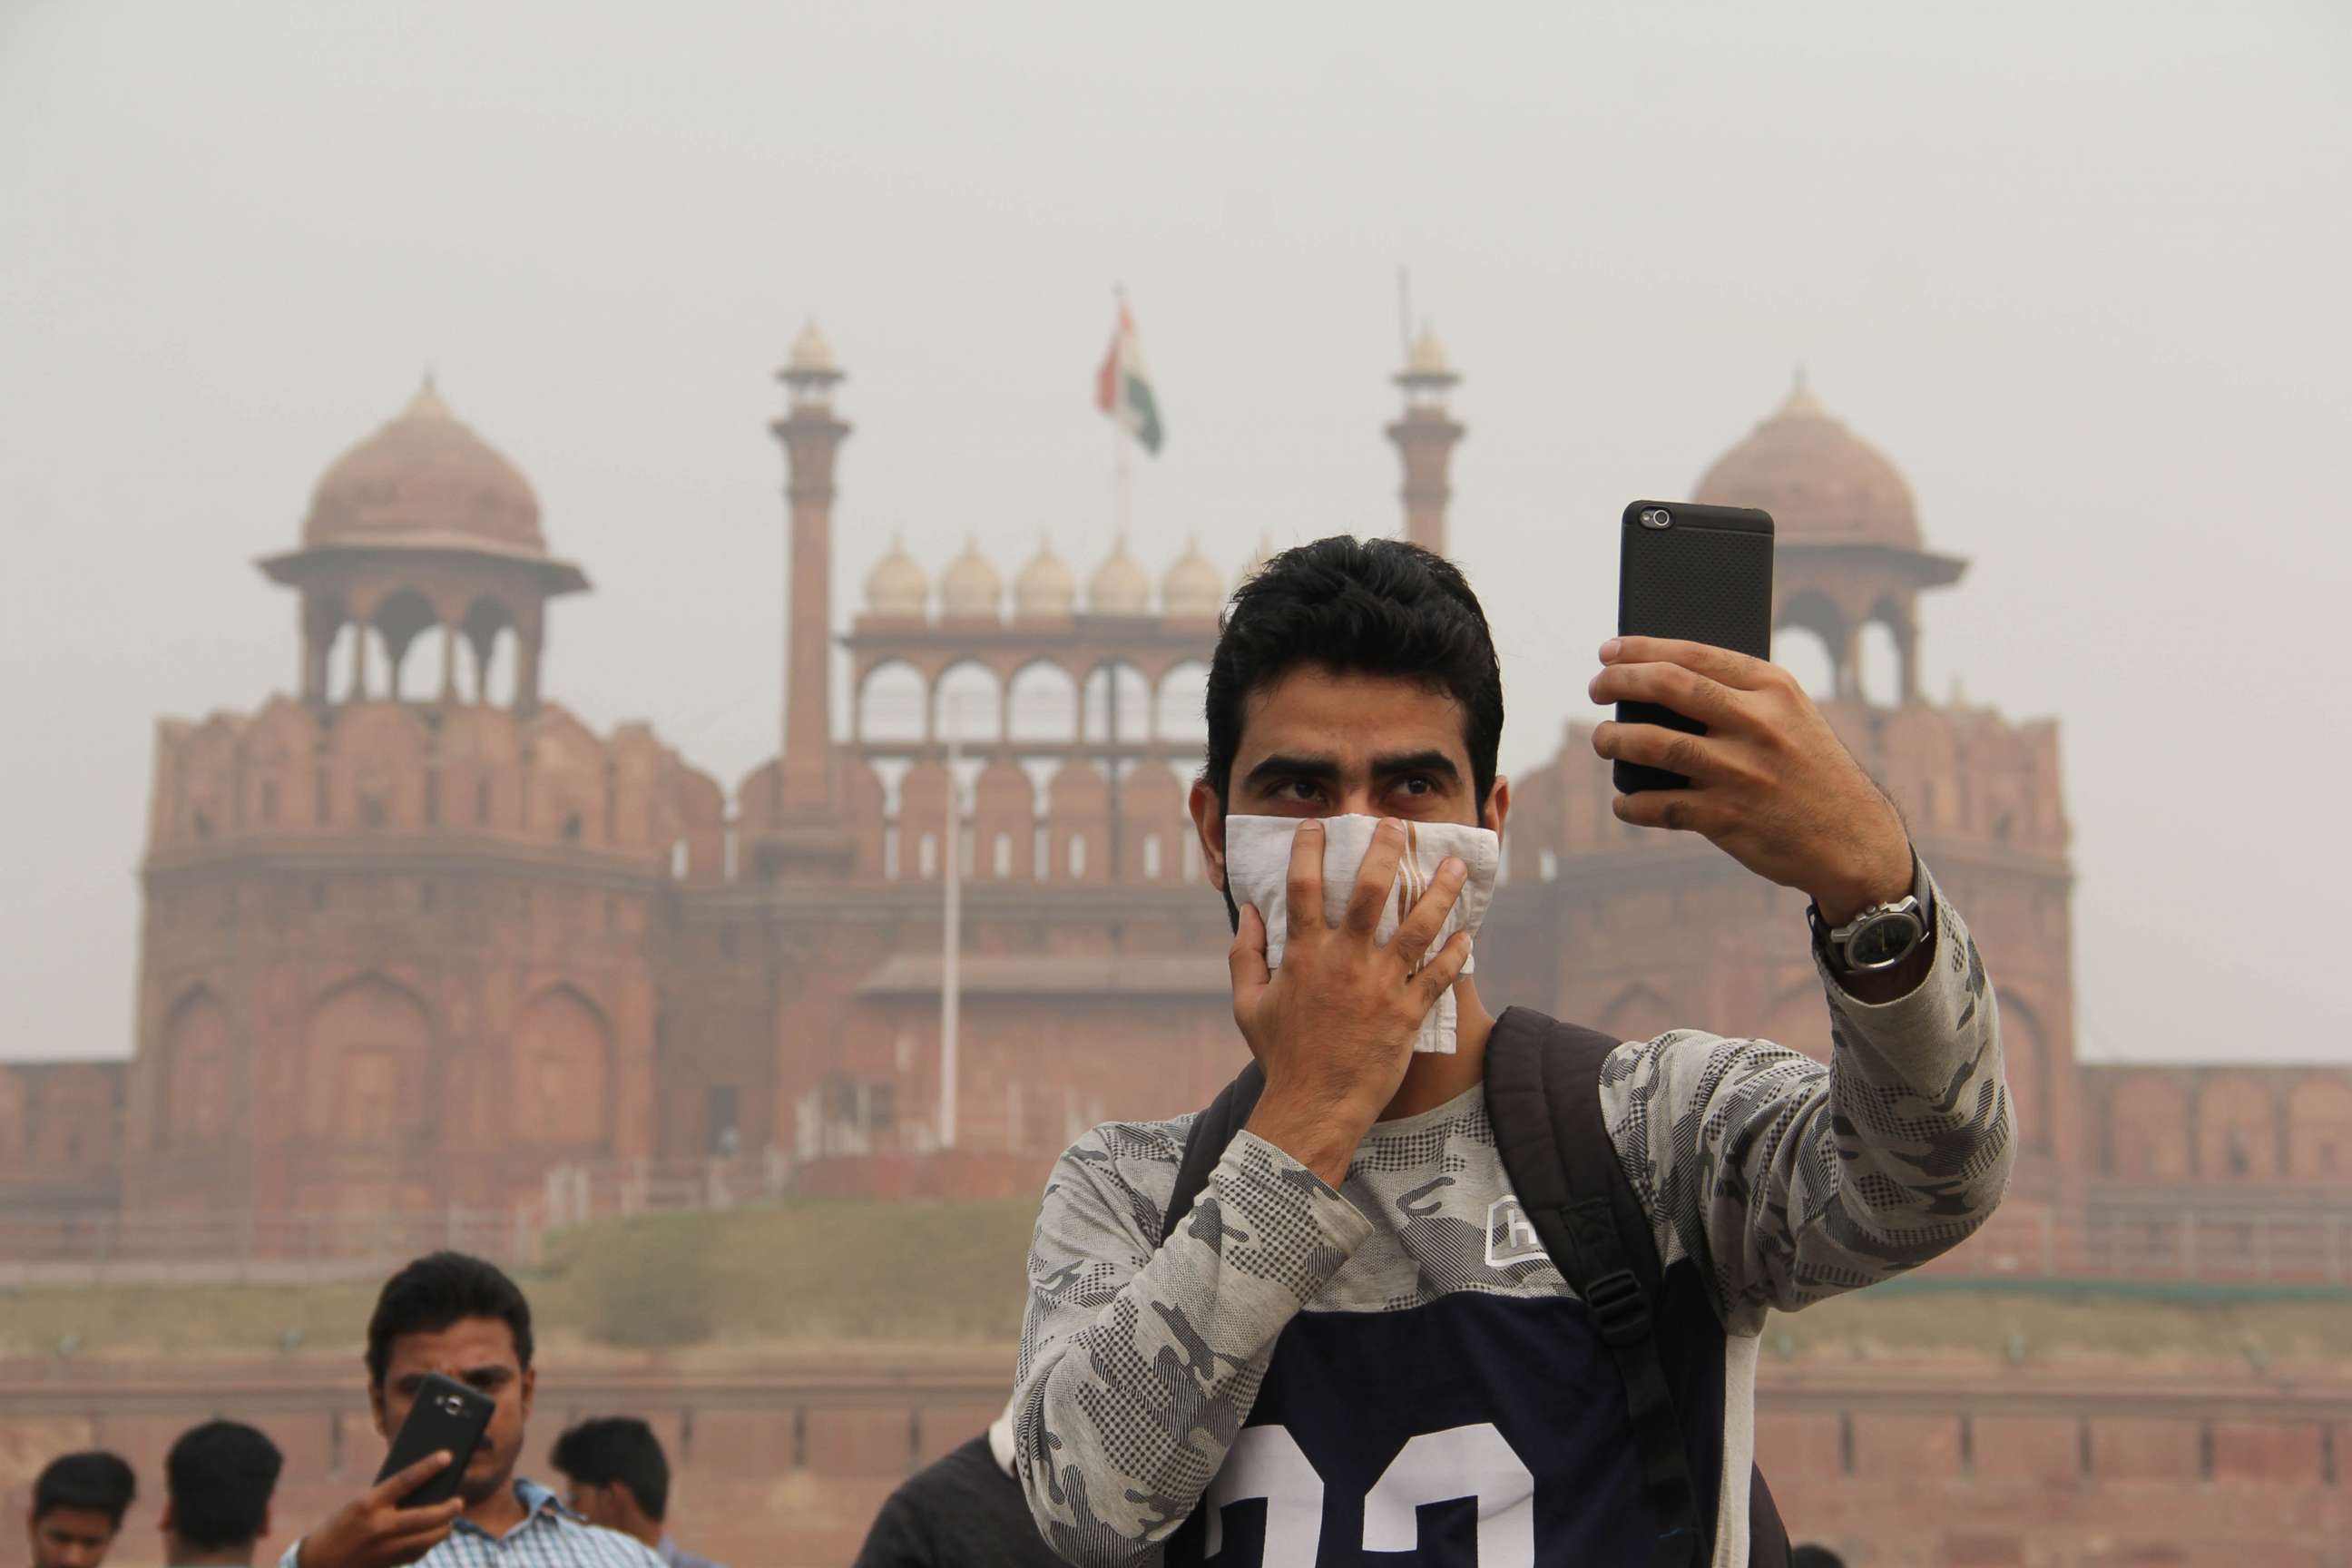 PHOTO: Young people take selfies in front of The Red Fort in Delhi on Nov. 12, 2017.